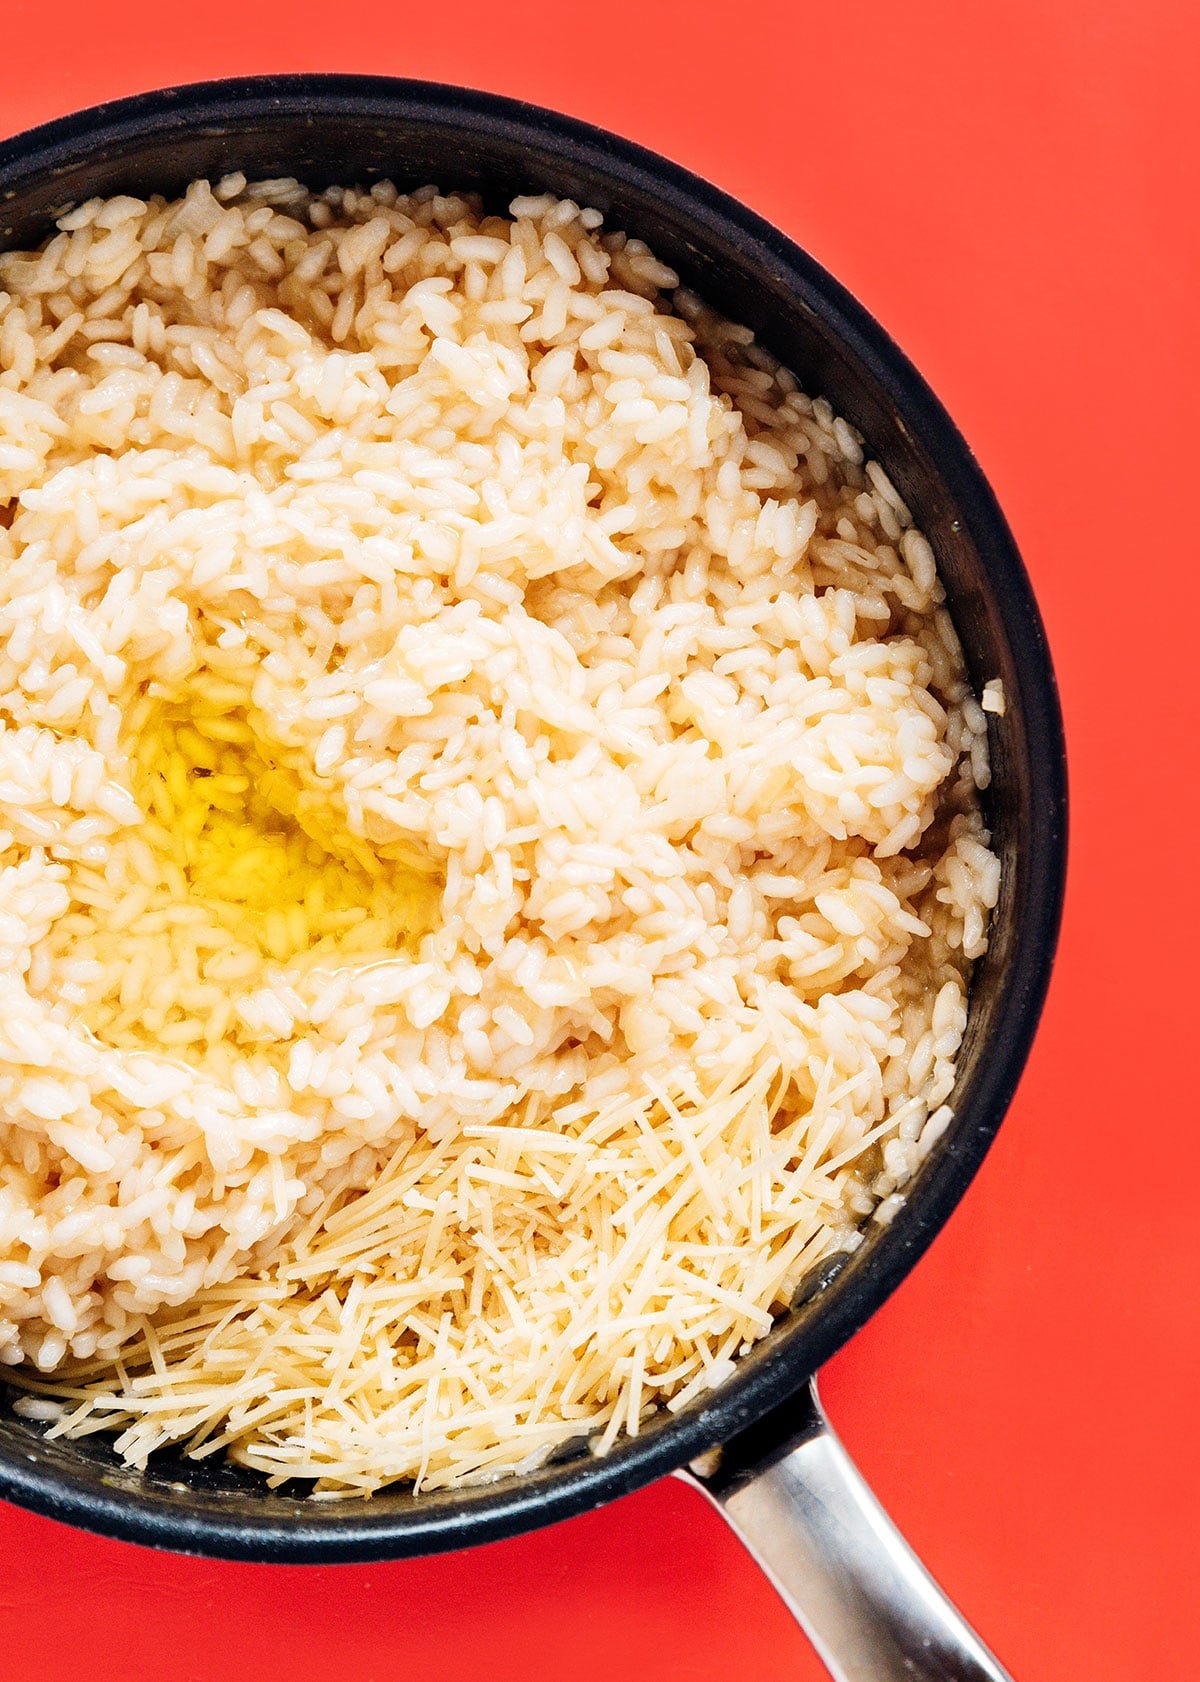 A pan filled with cooked arborio rice, parmesan cheese, and truffle oil